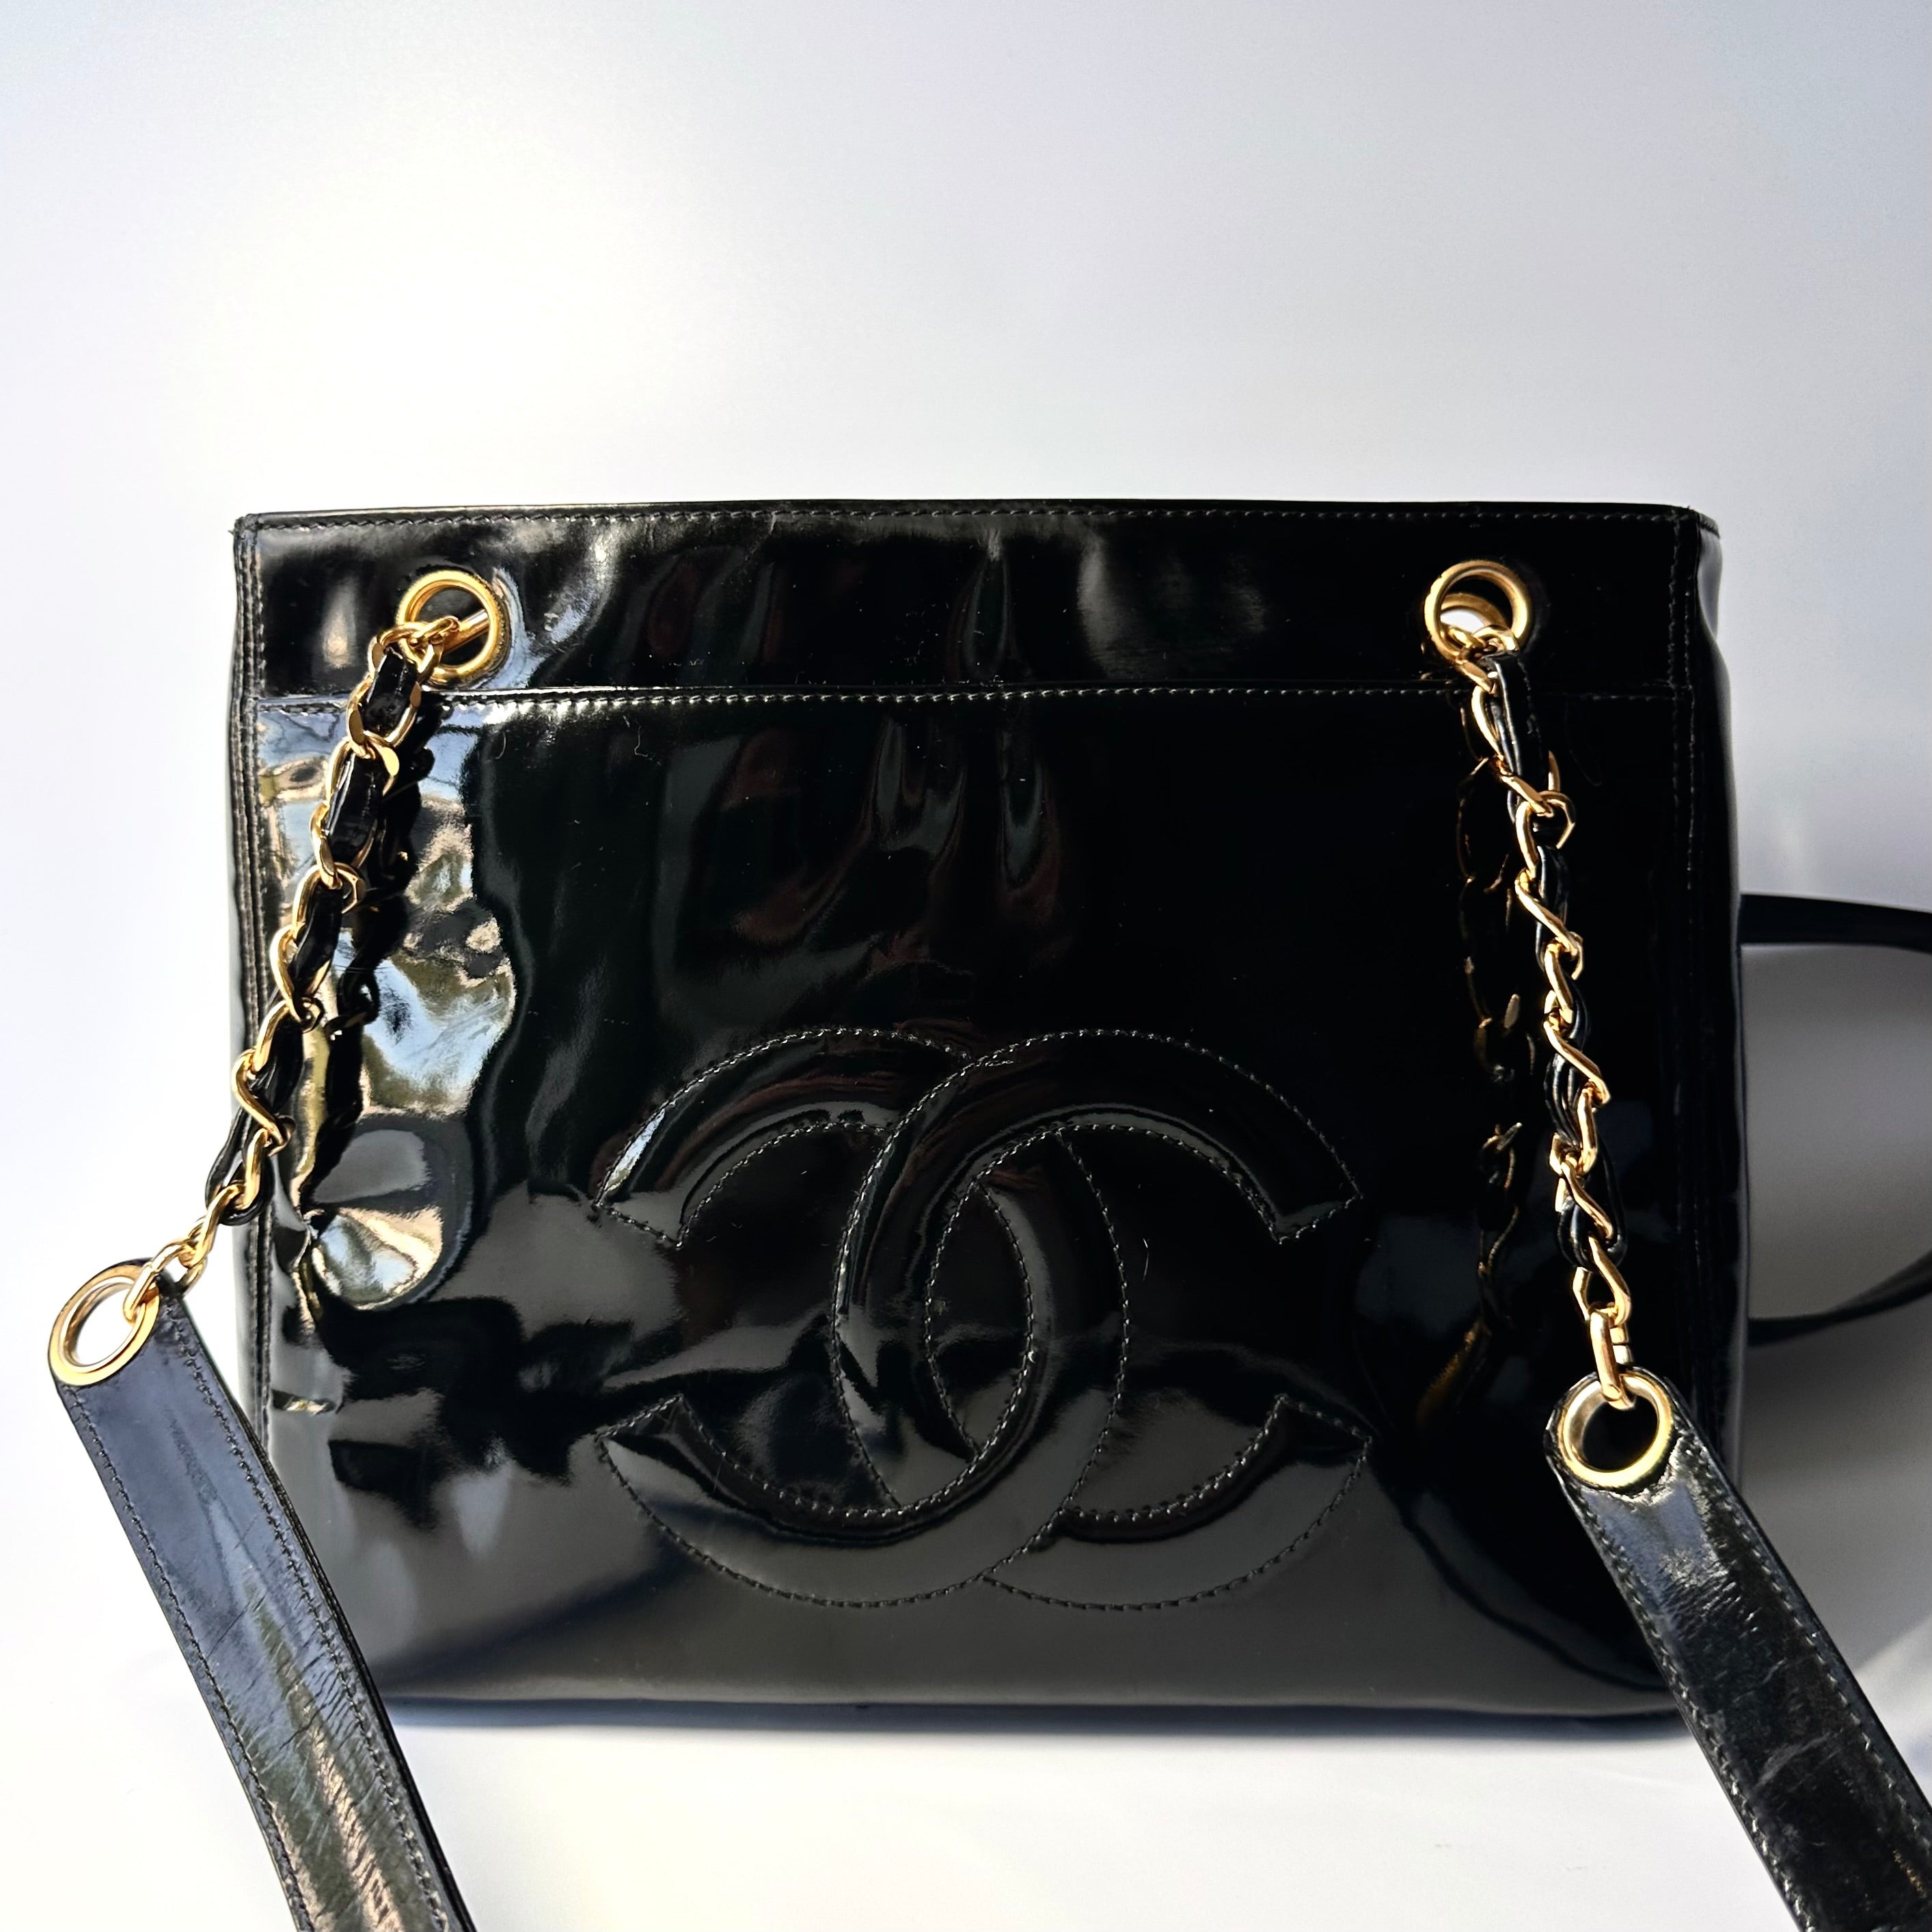 Patent leather bag with chain